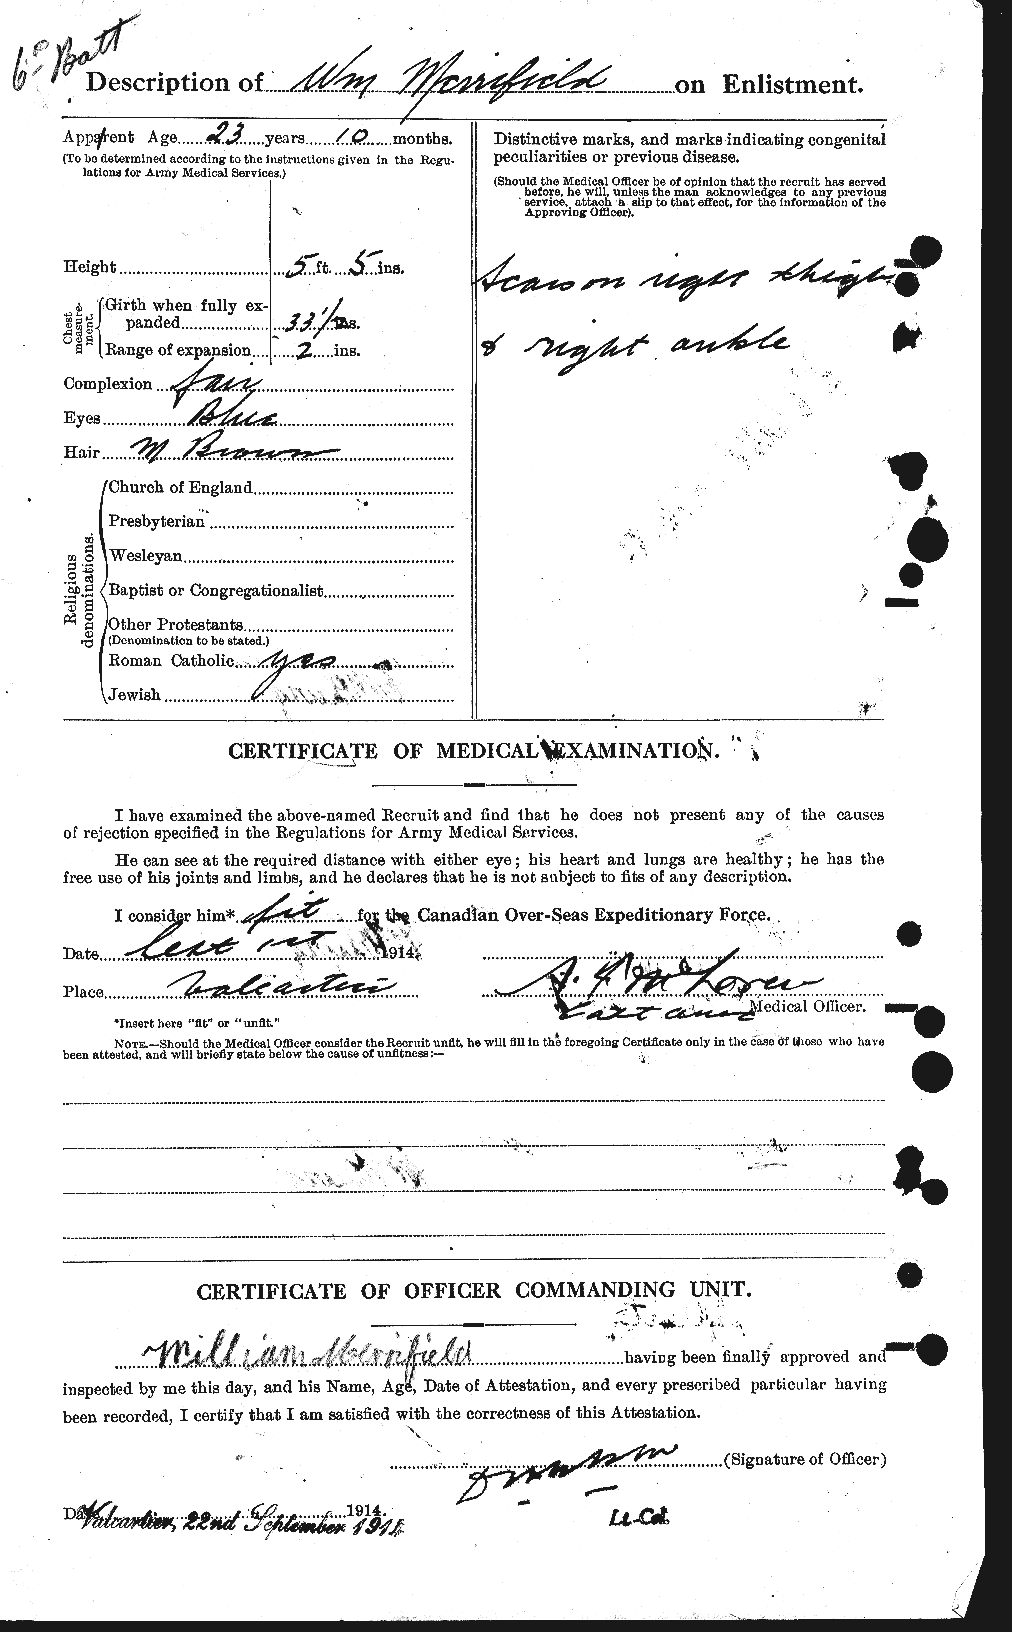 Personnel Records of the First World War - CEF 490315b